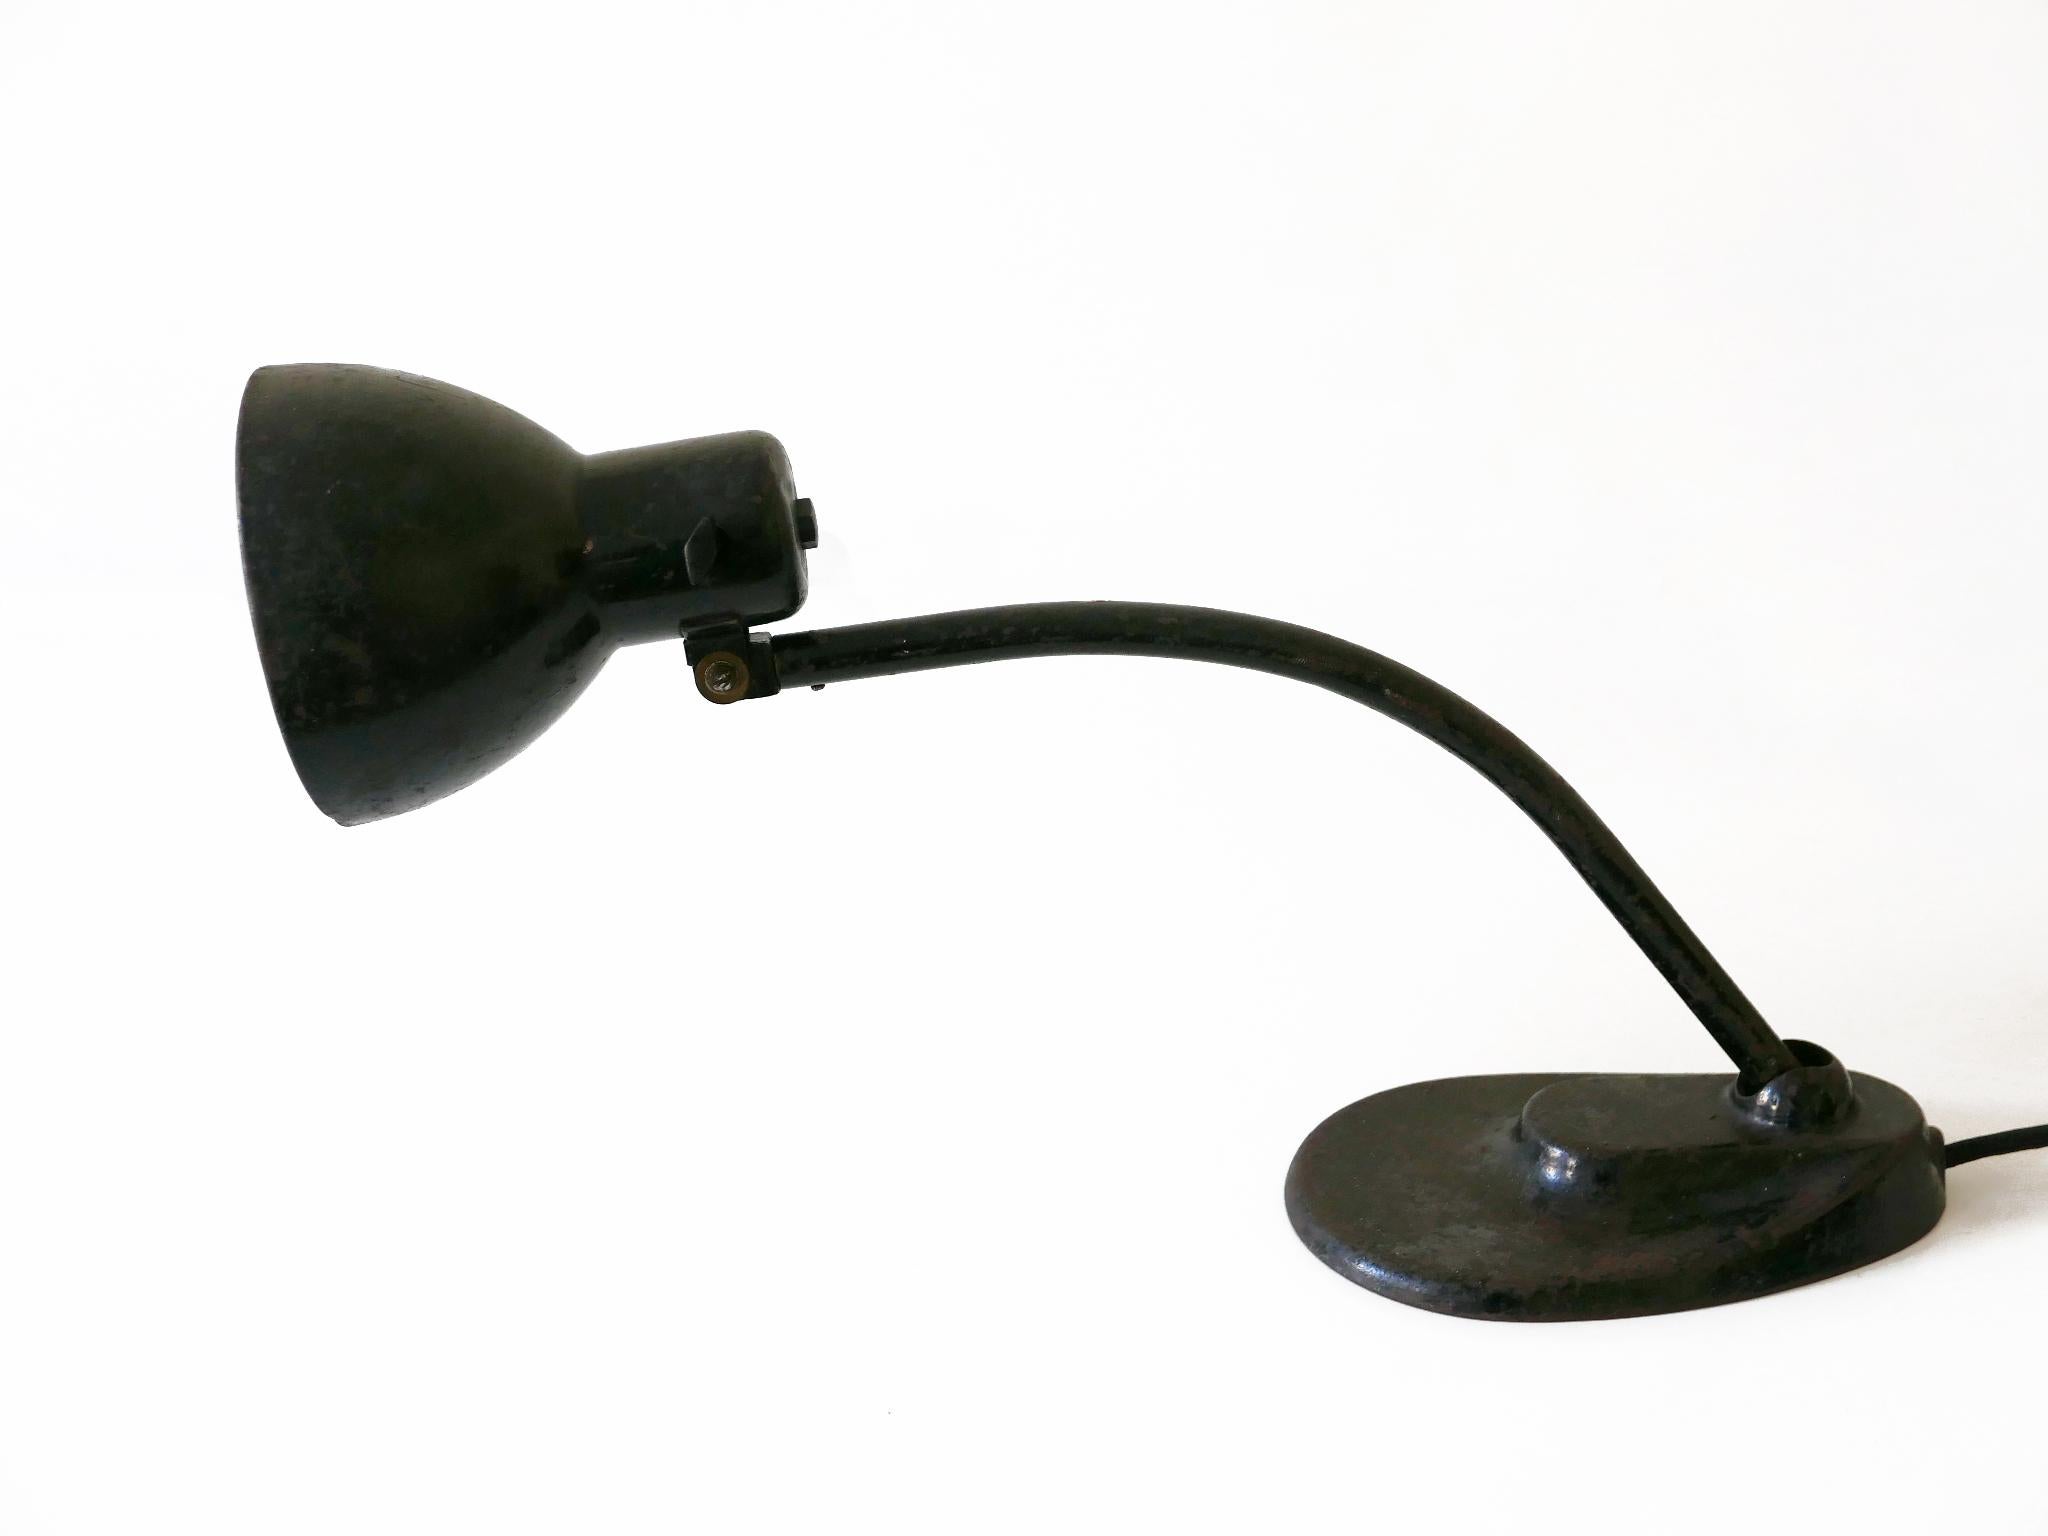 Bauhaus Table Lamp '967' by Marianne Brandt & Hin Bredendieck for Kandem, 1930s For Sale 7